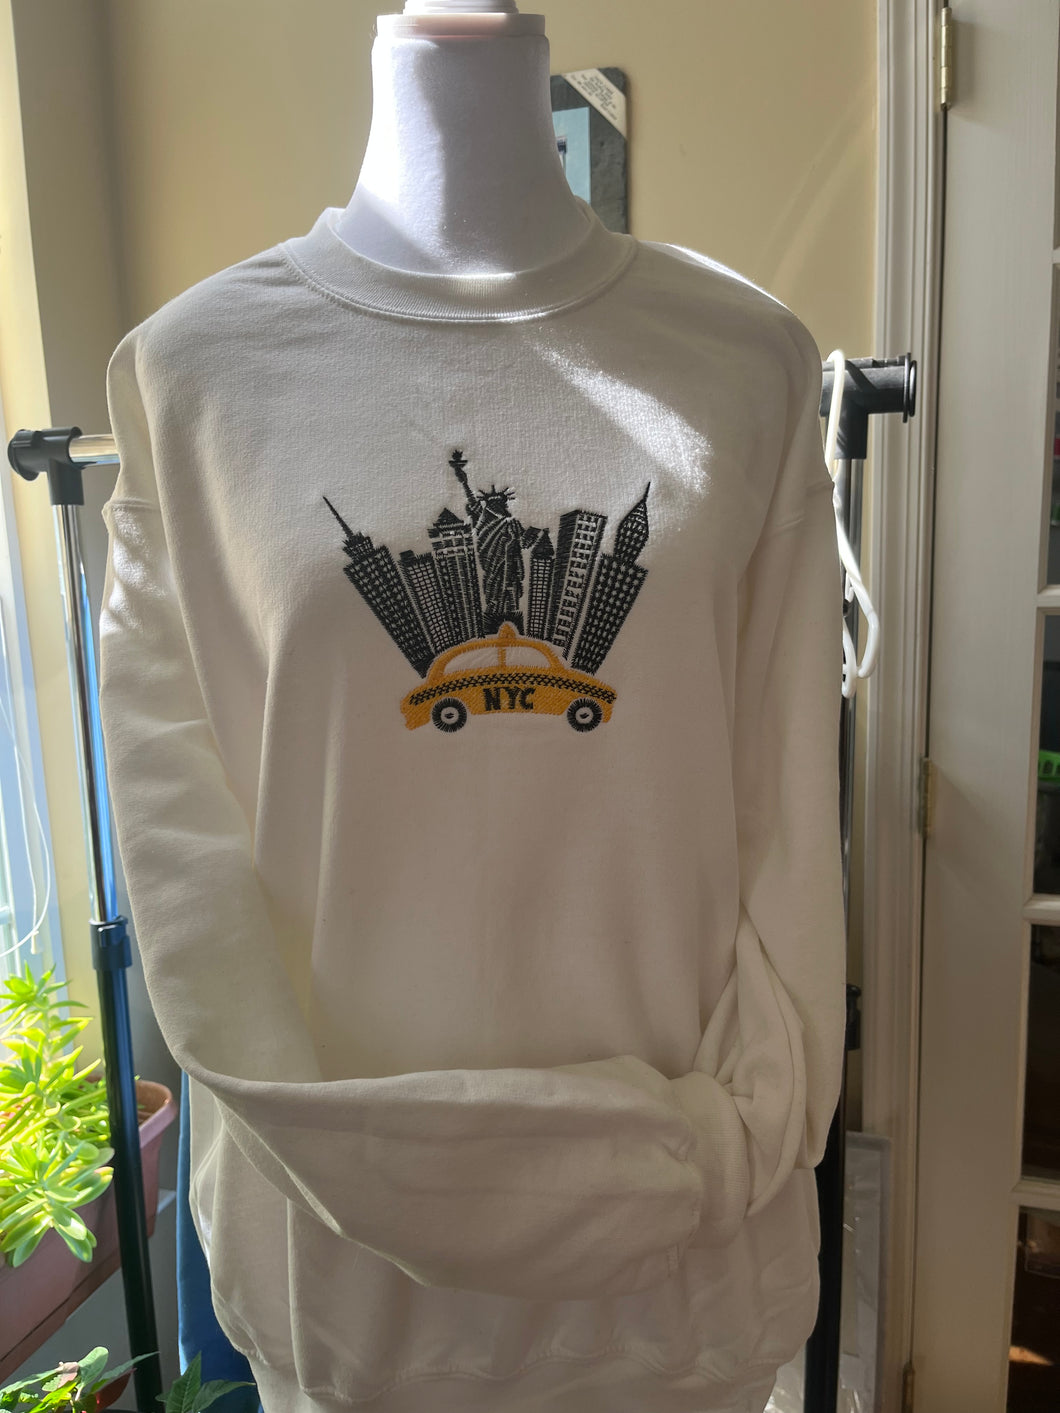 New York City and Yellow Cab embroidered crew neck